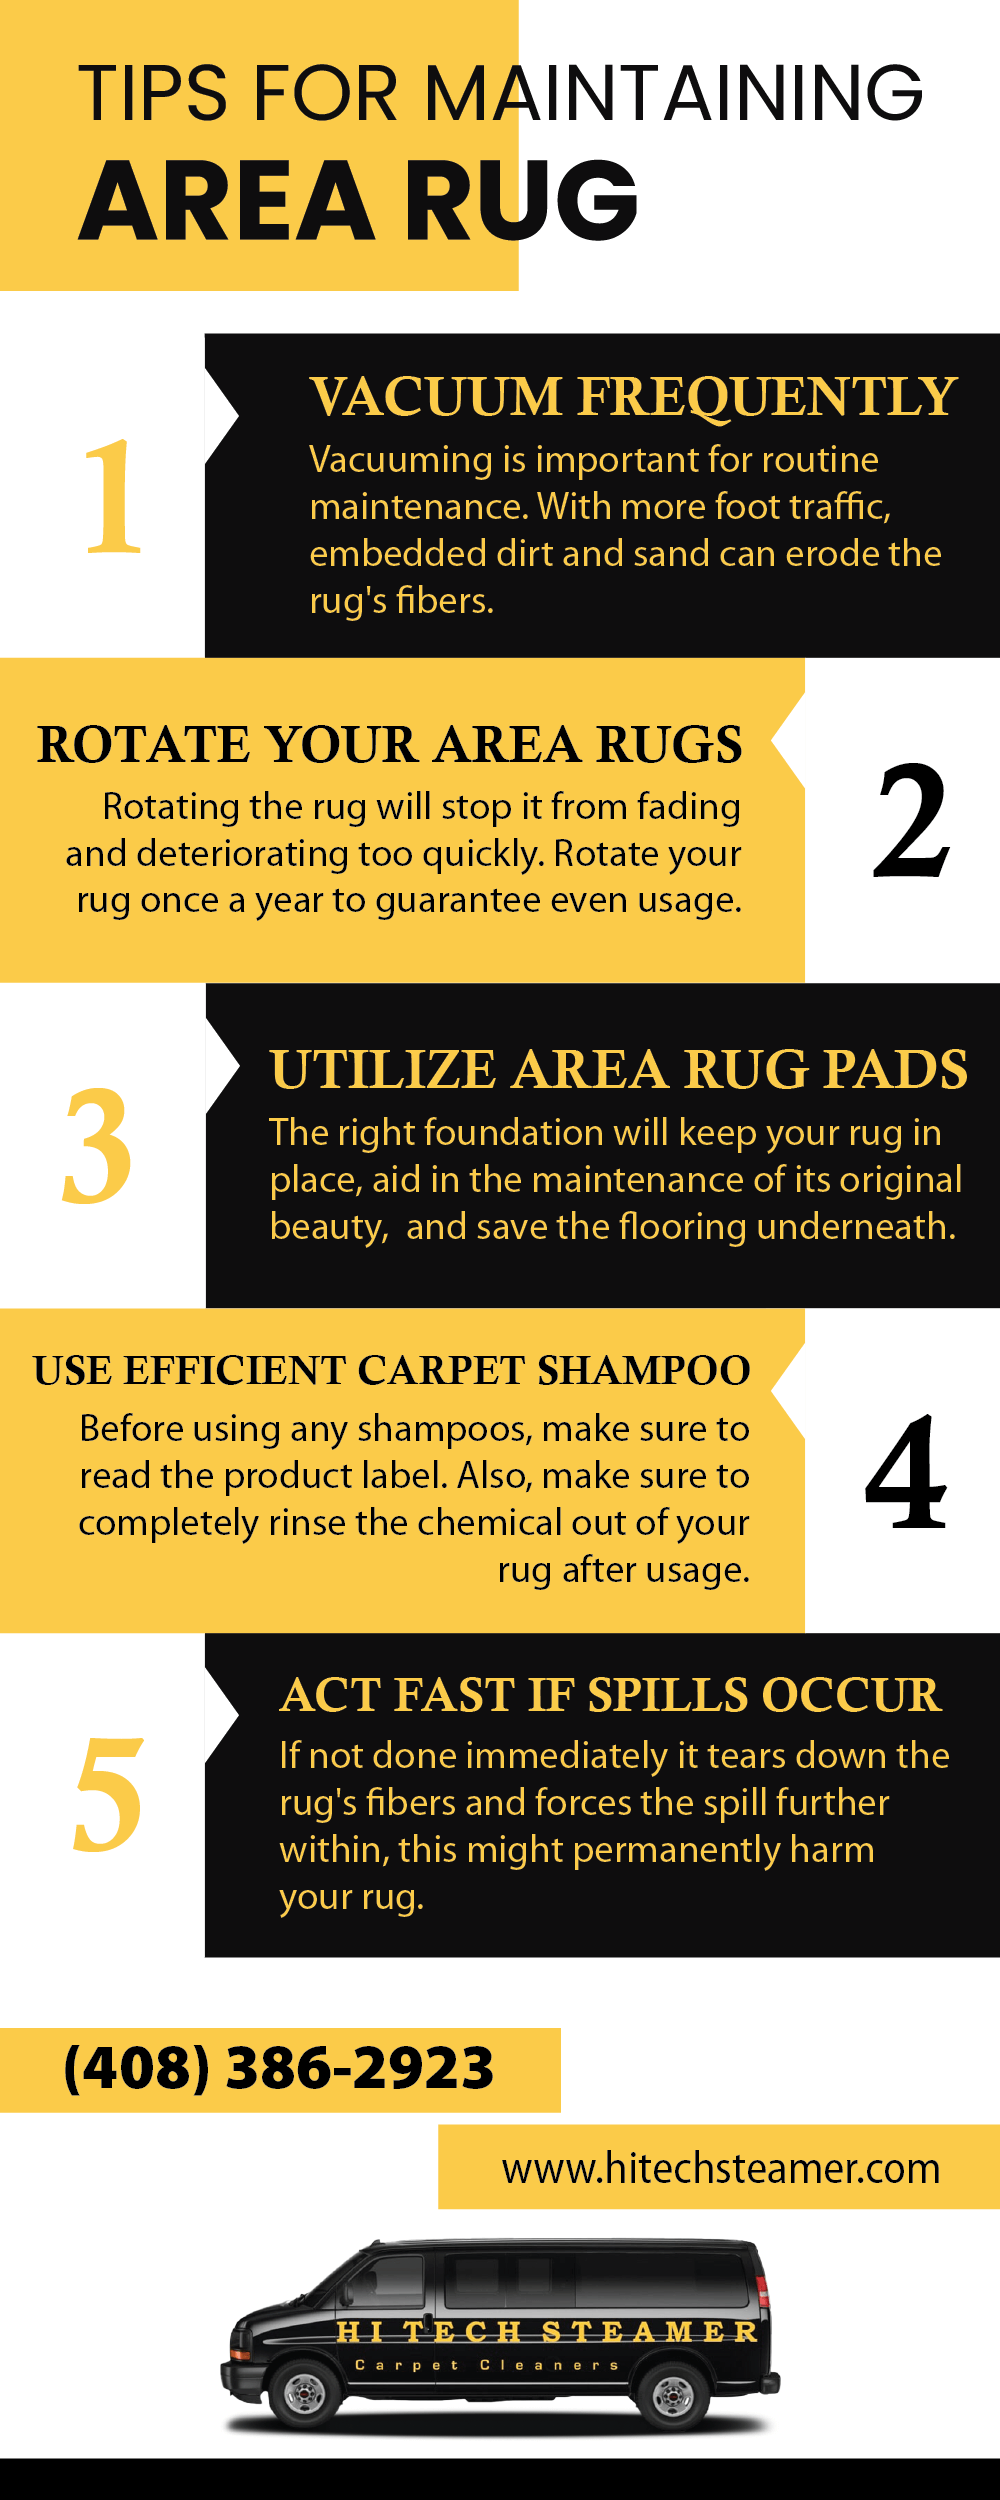 Tips For Maintaining Area Rug